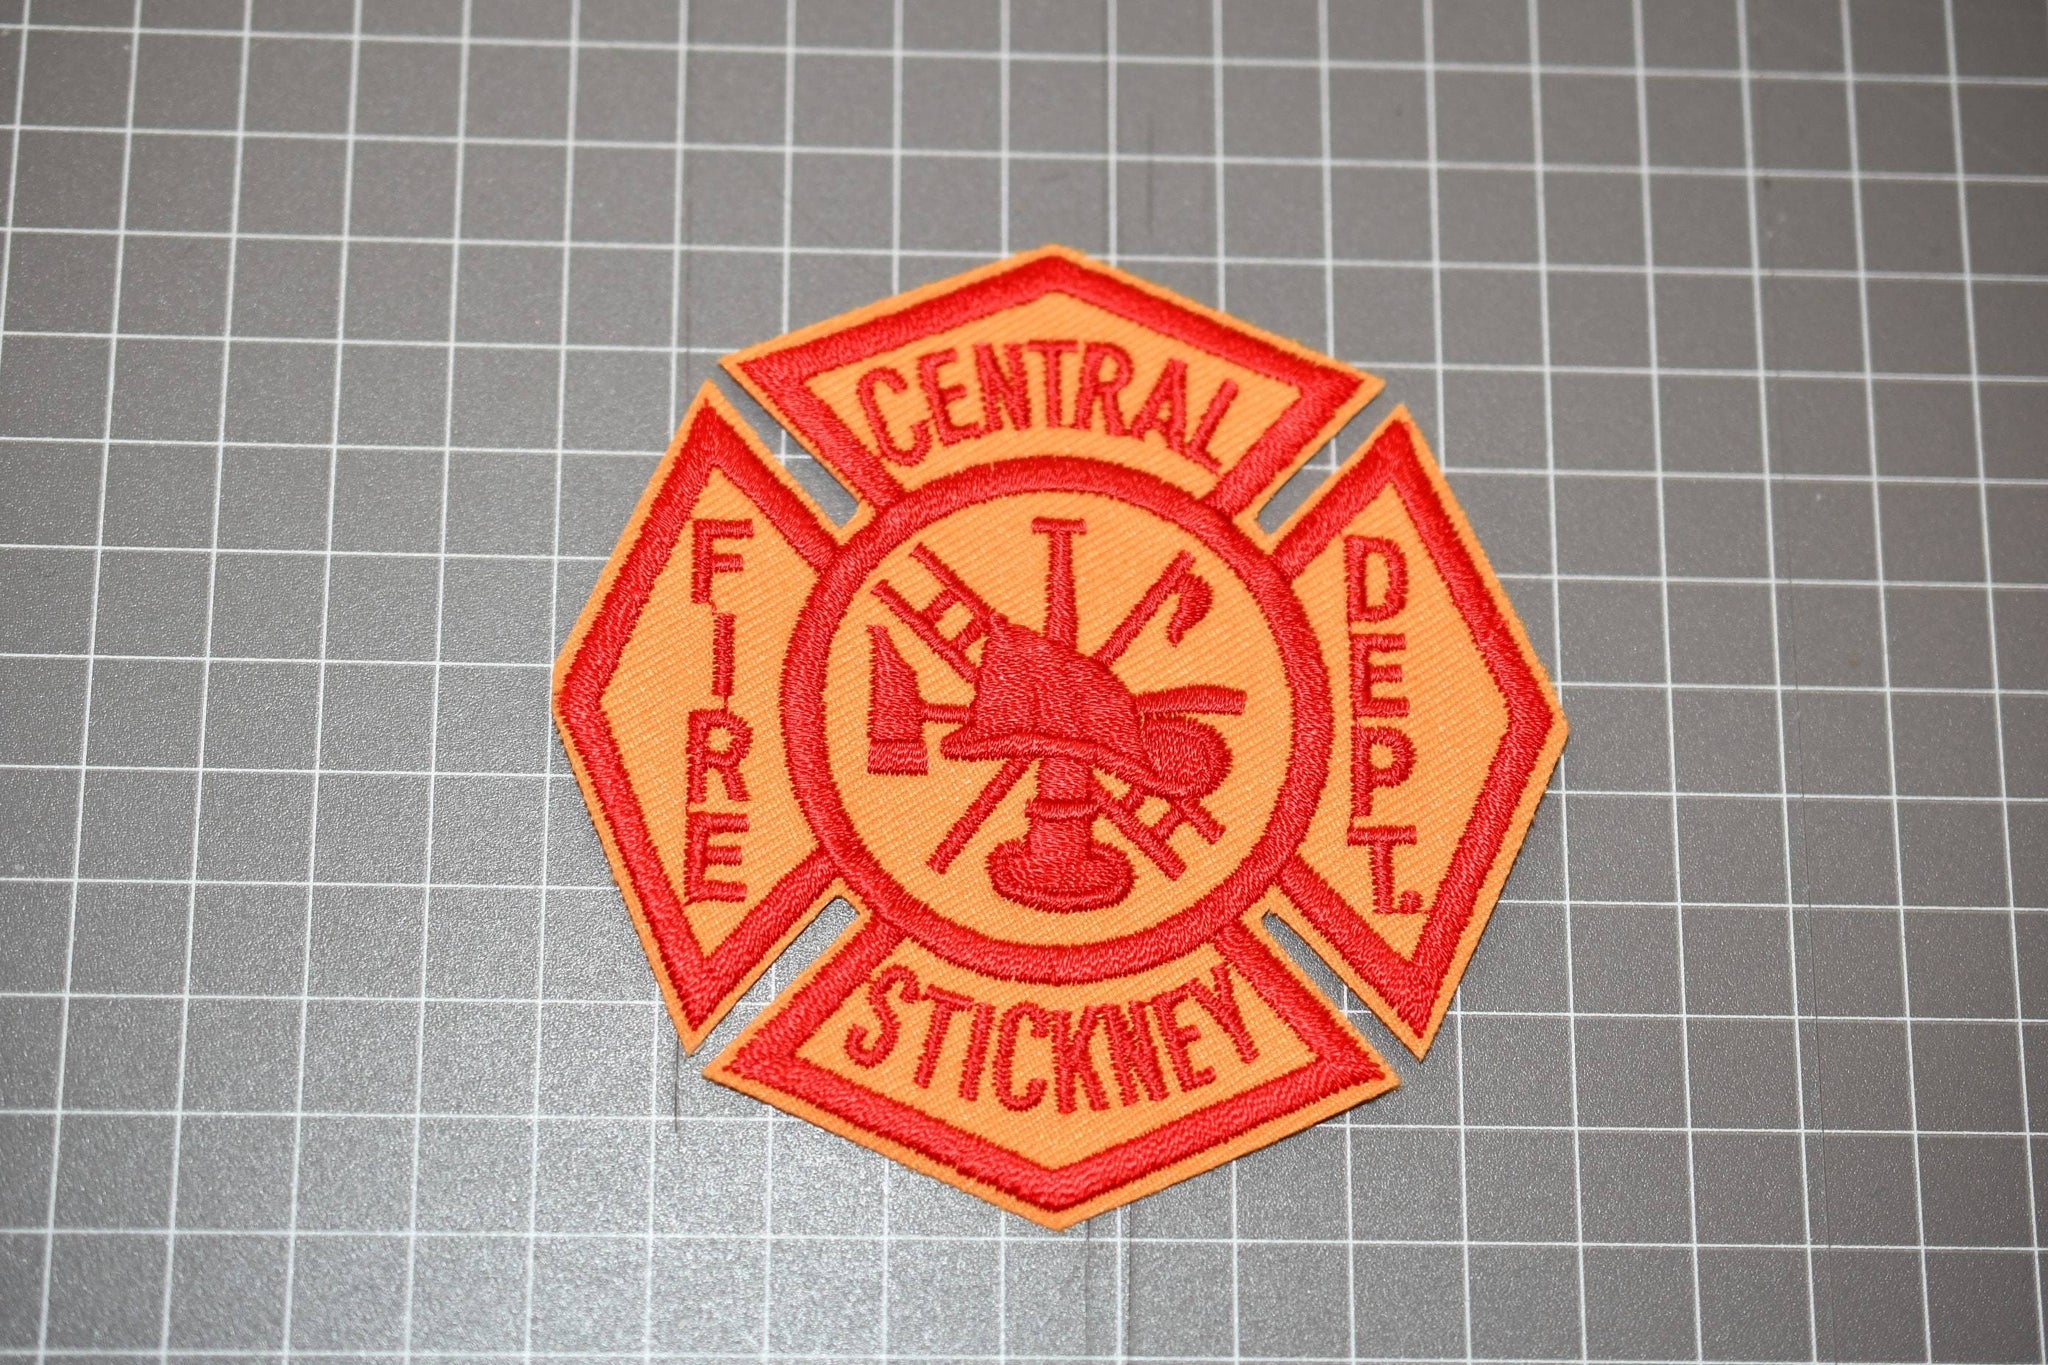 Central Stickney Illinois Fire Department Patch (U.S. Fire Patches)